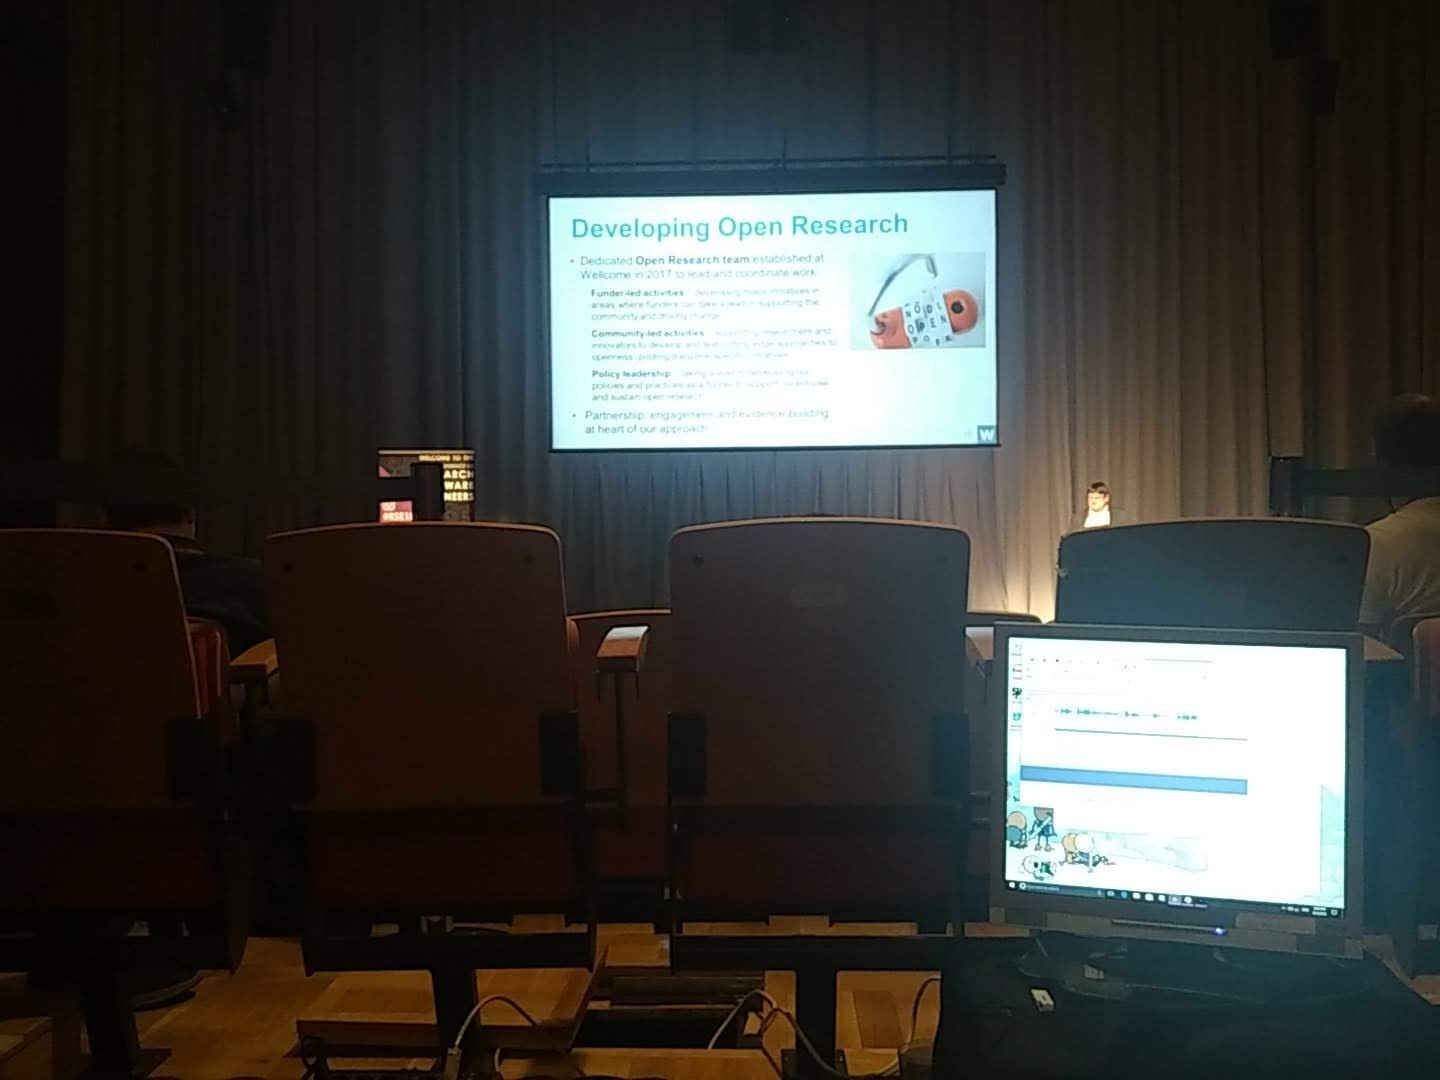 In the foreground, a computer monitor sits just in front of a row of chair backs. Over the chairs,  we can just see a figure at a lectern giving a talk, with their slides projected onto a large screen behind them. The slide title is clearly legible: 'Developing Open Research'